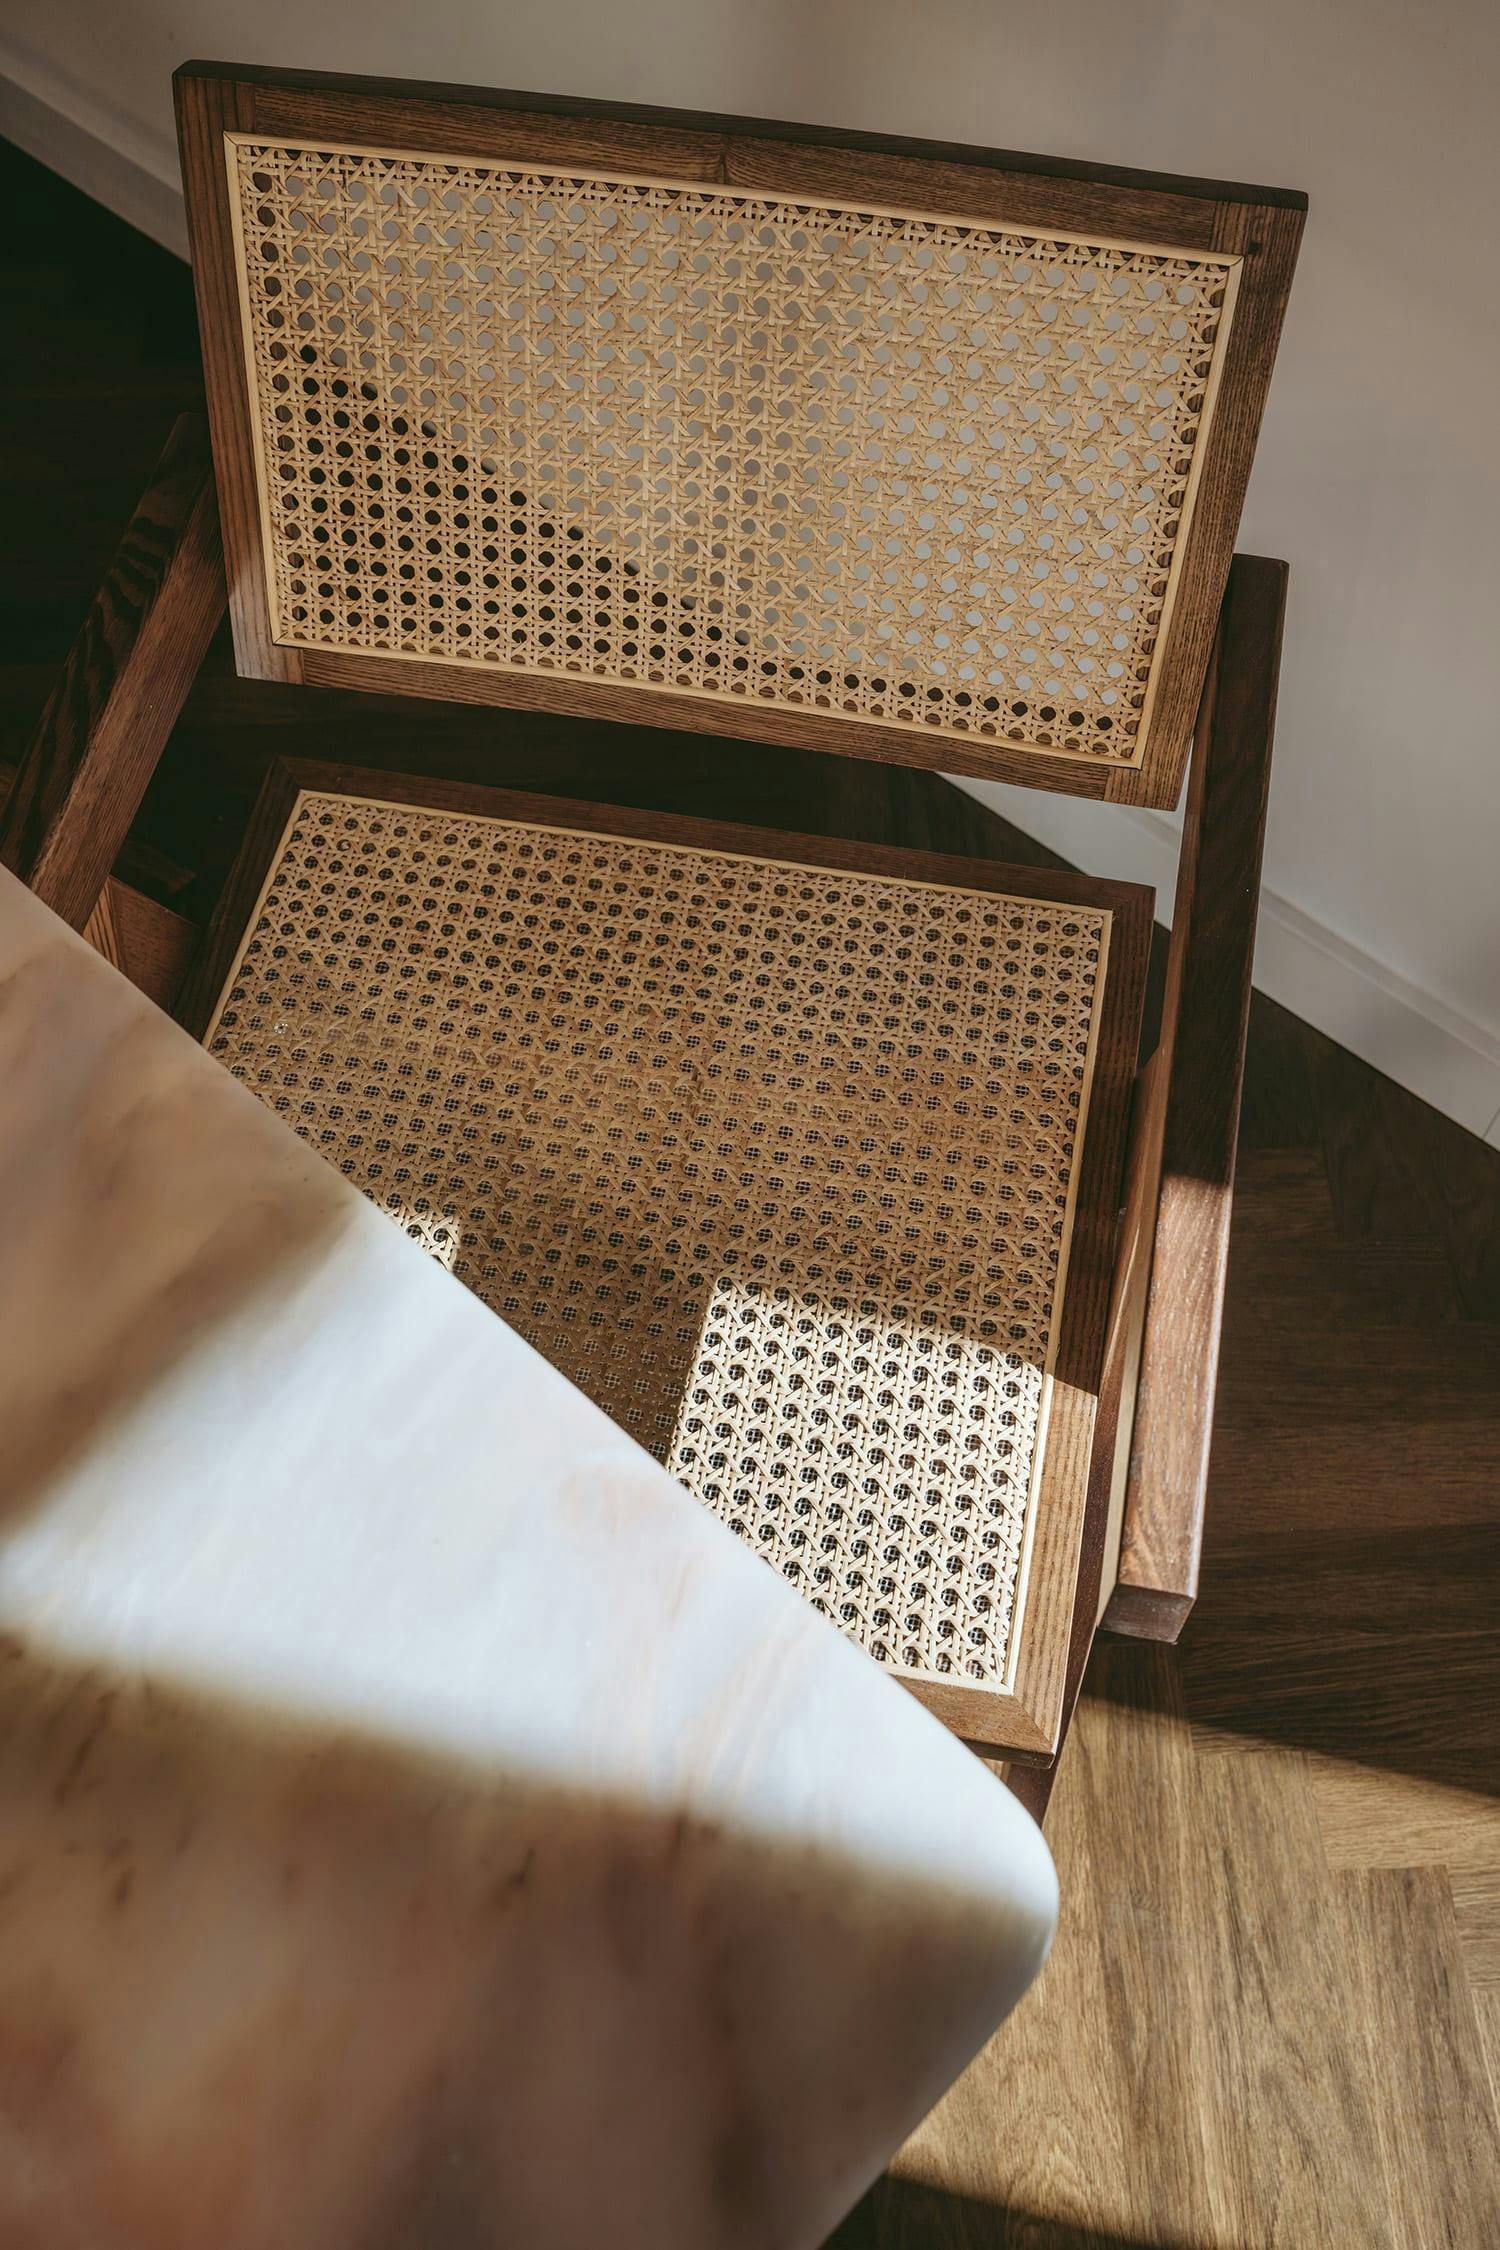 The image features a wooden floor with a chair placed in the middle of it.